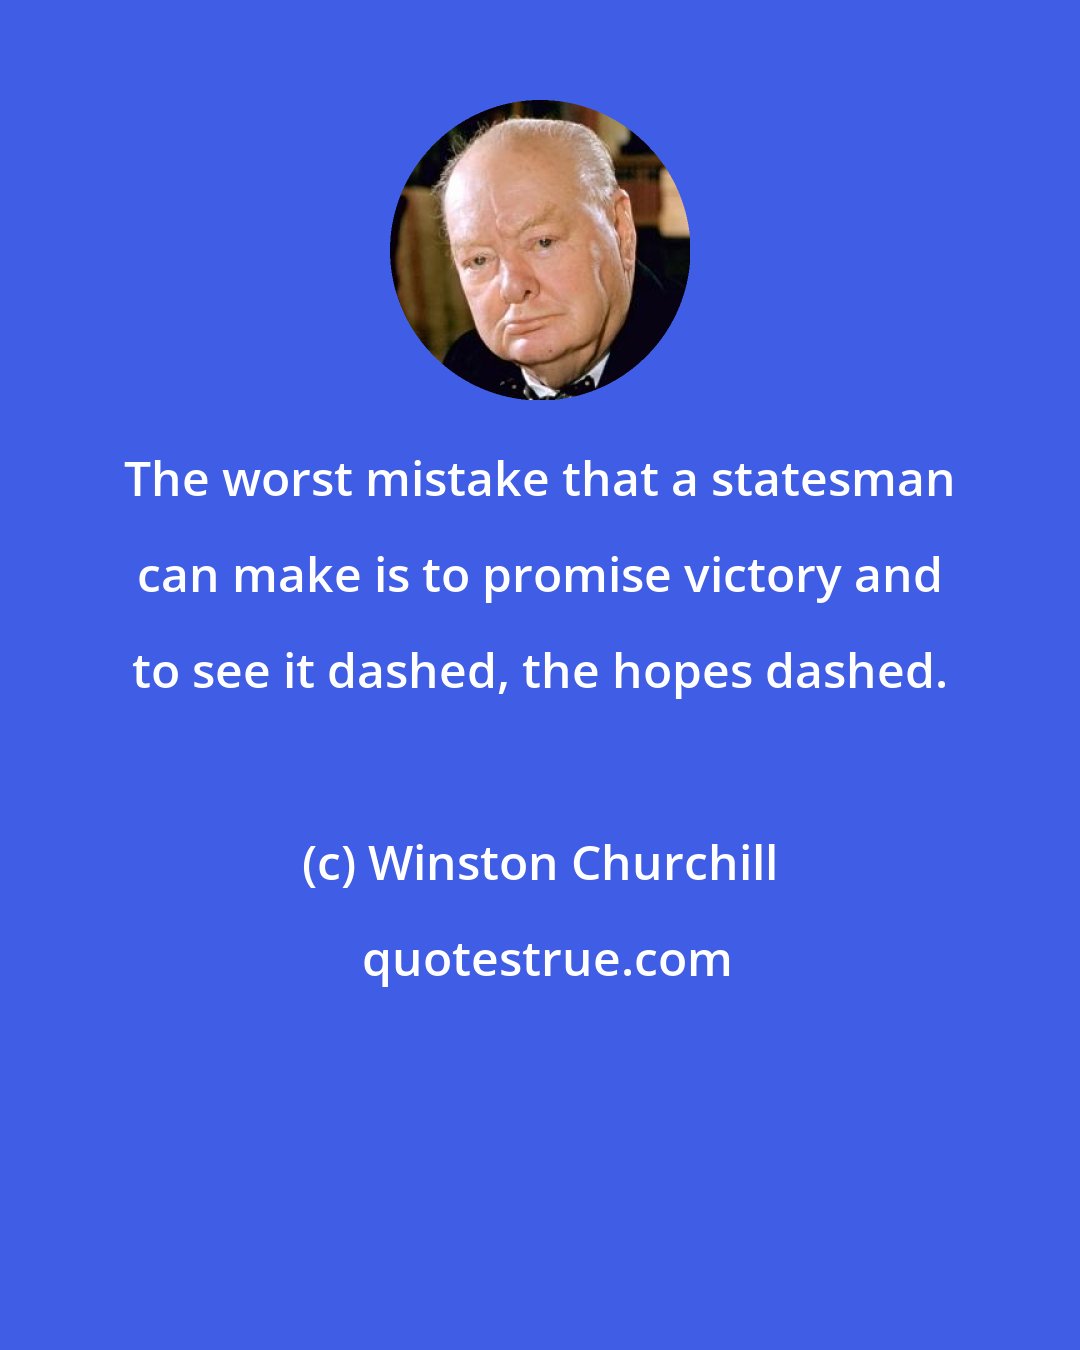 Winston Churchill: The worst mistake that a statesman can make is to promise victory and to see it dashed, the hopes dashed.